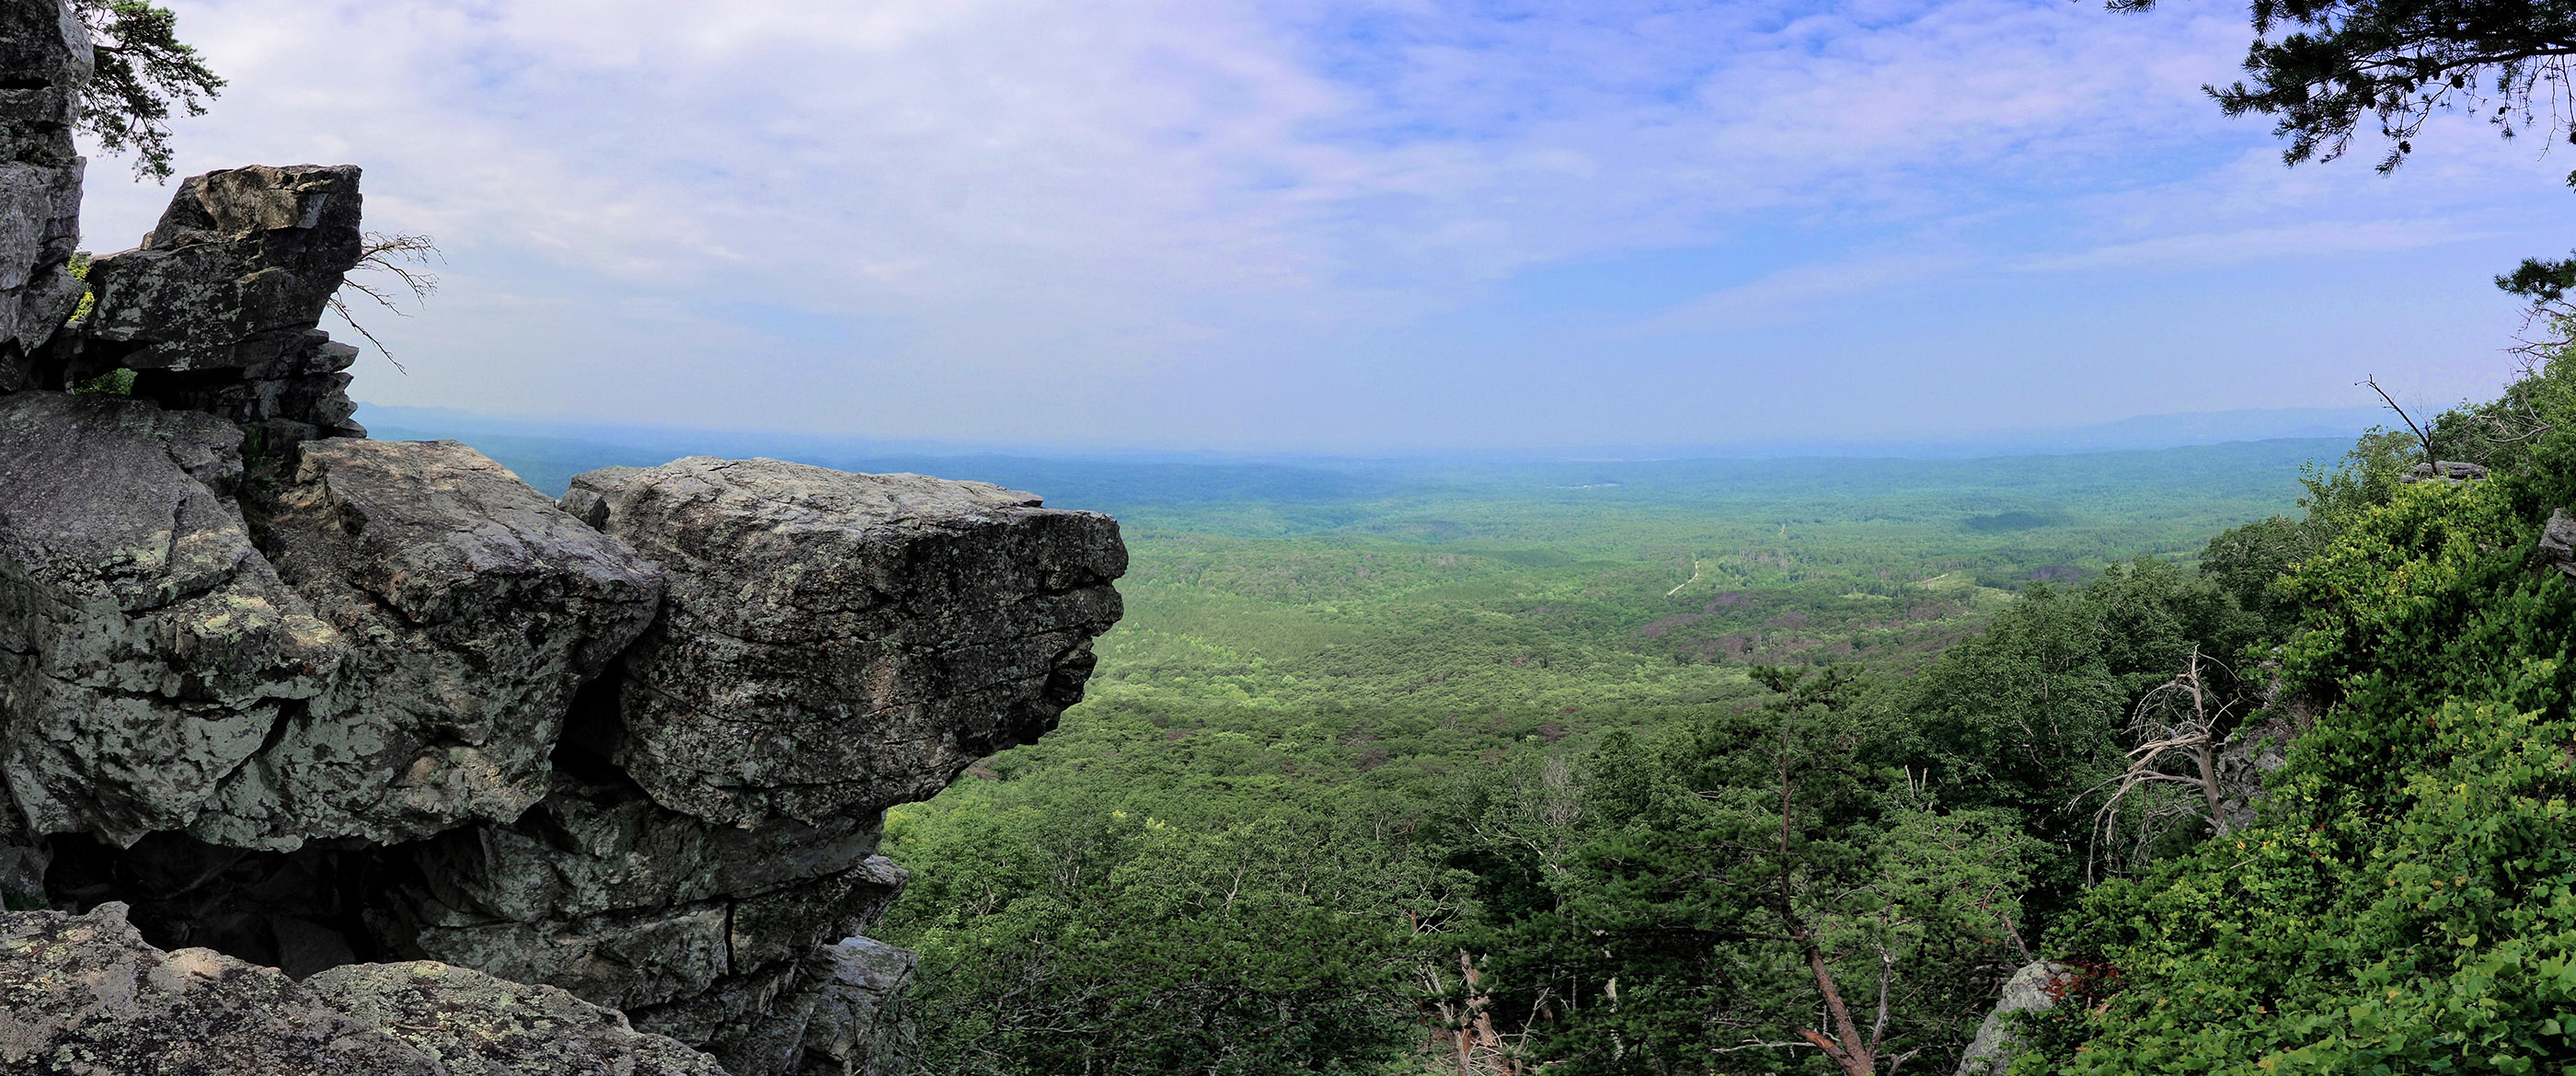 The view from Pulpit Rock, Cheaha Mountain State Park